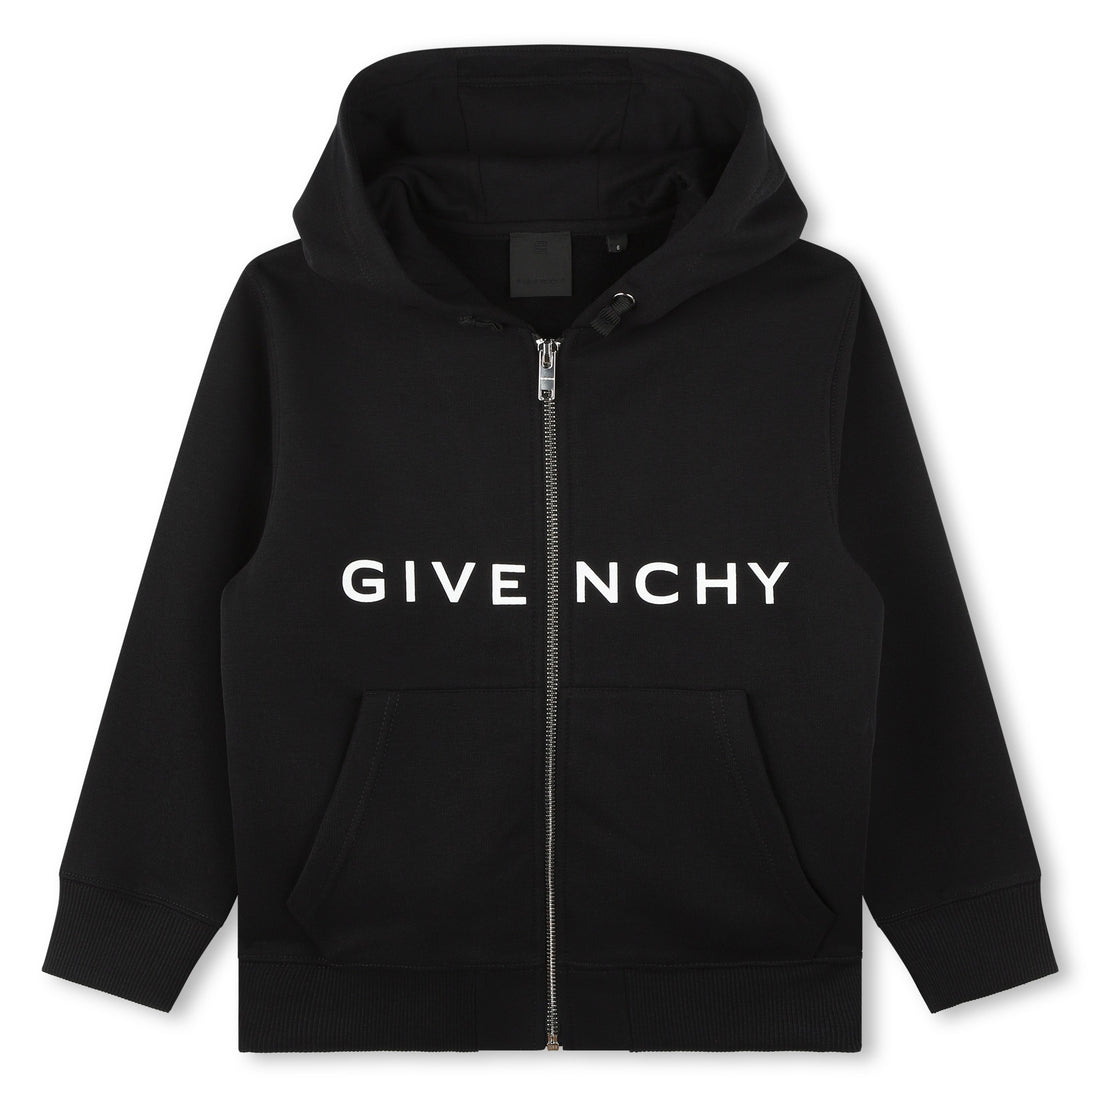 Givenchy Hooded Cardigan Style: H25484